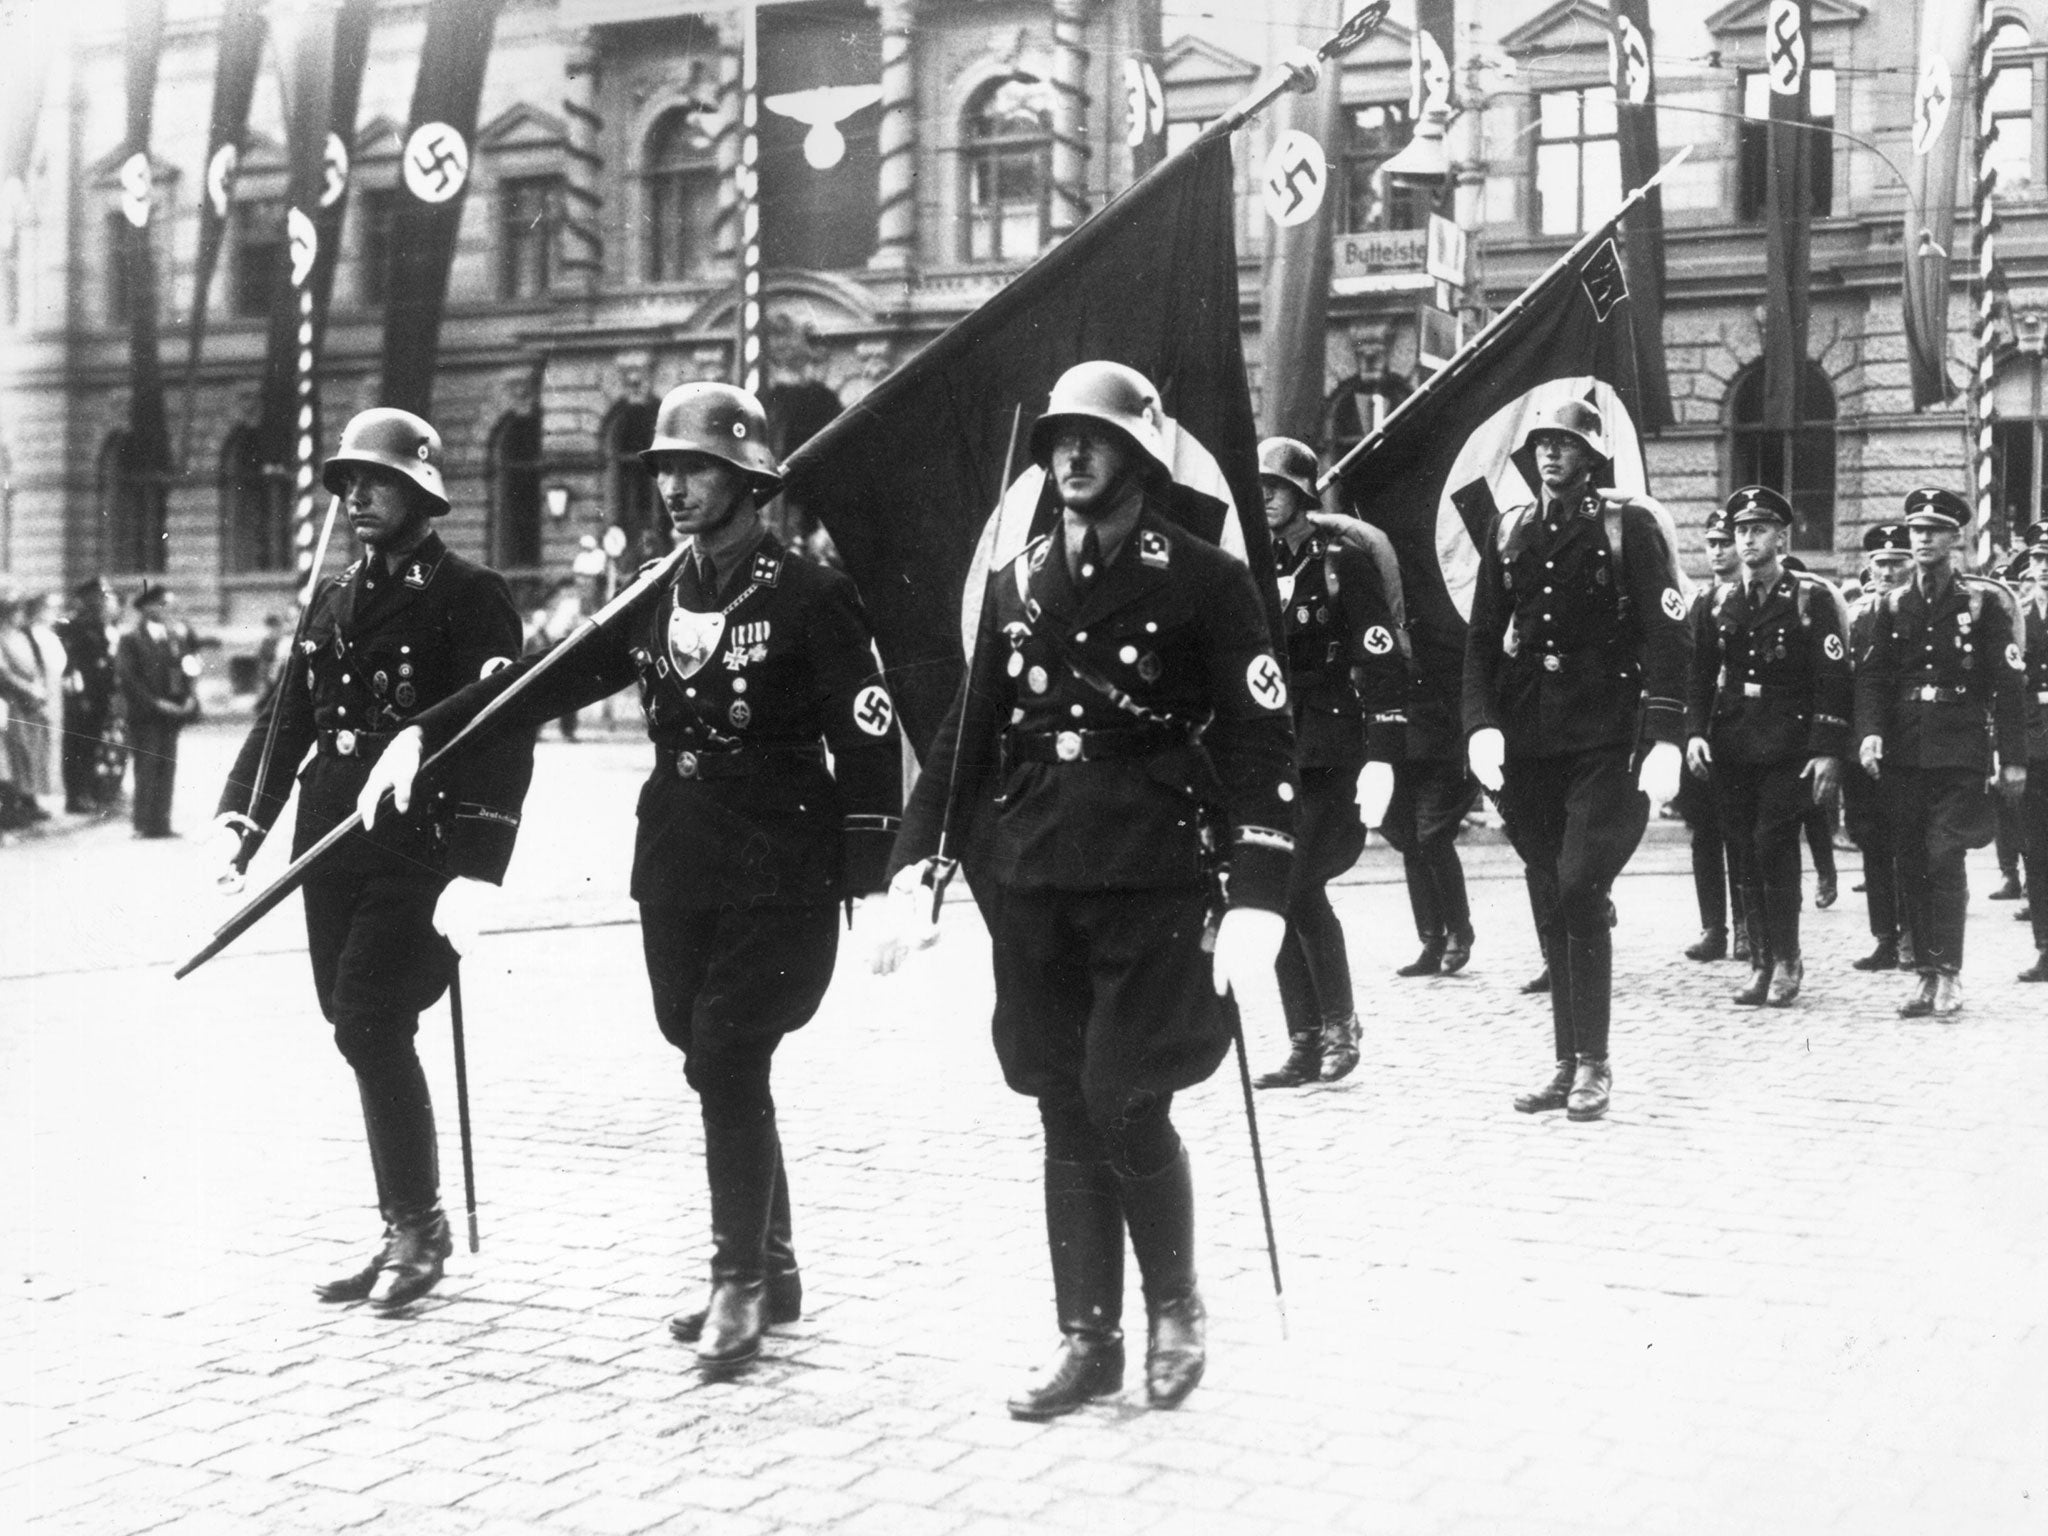 Nazi stormtroopers in Weimar, carrying swastika flags in ceremonial dress